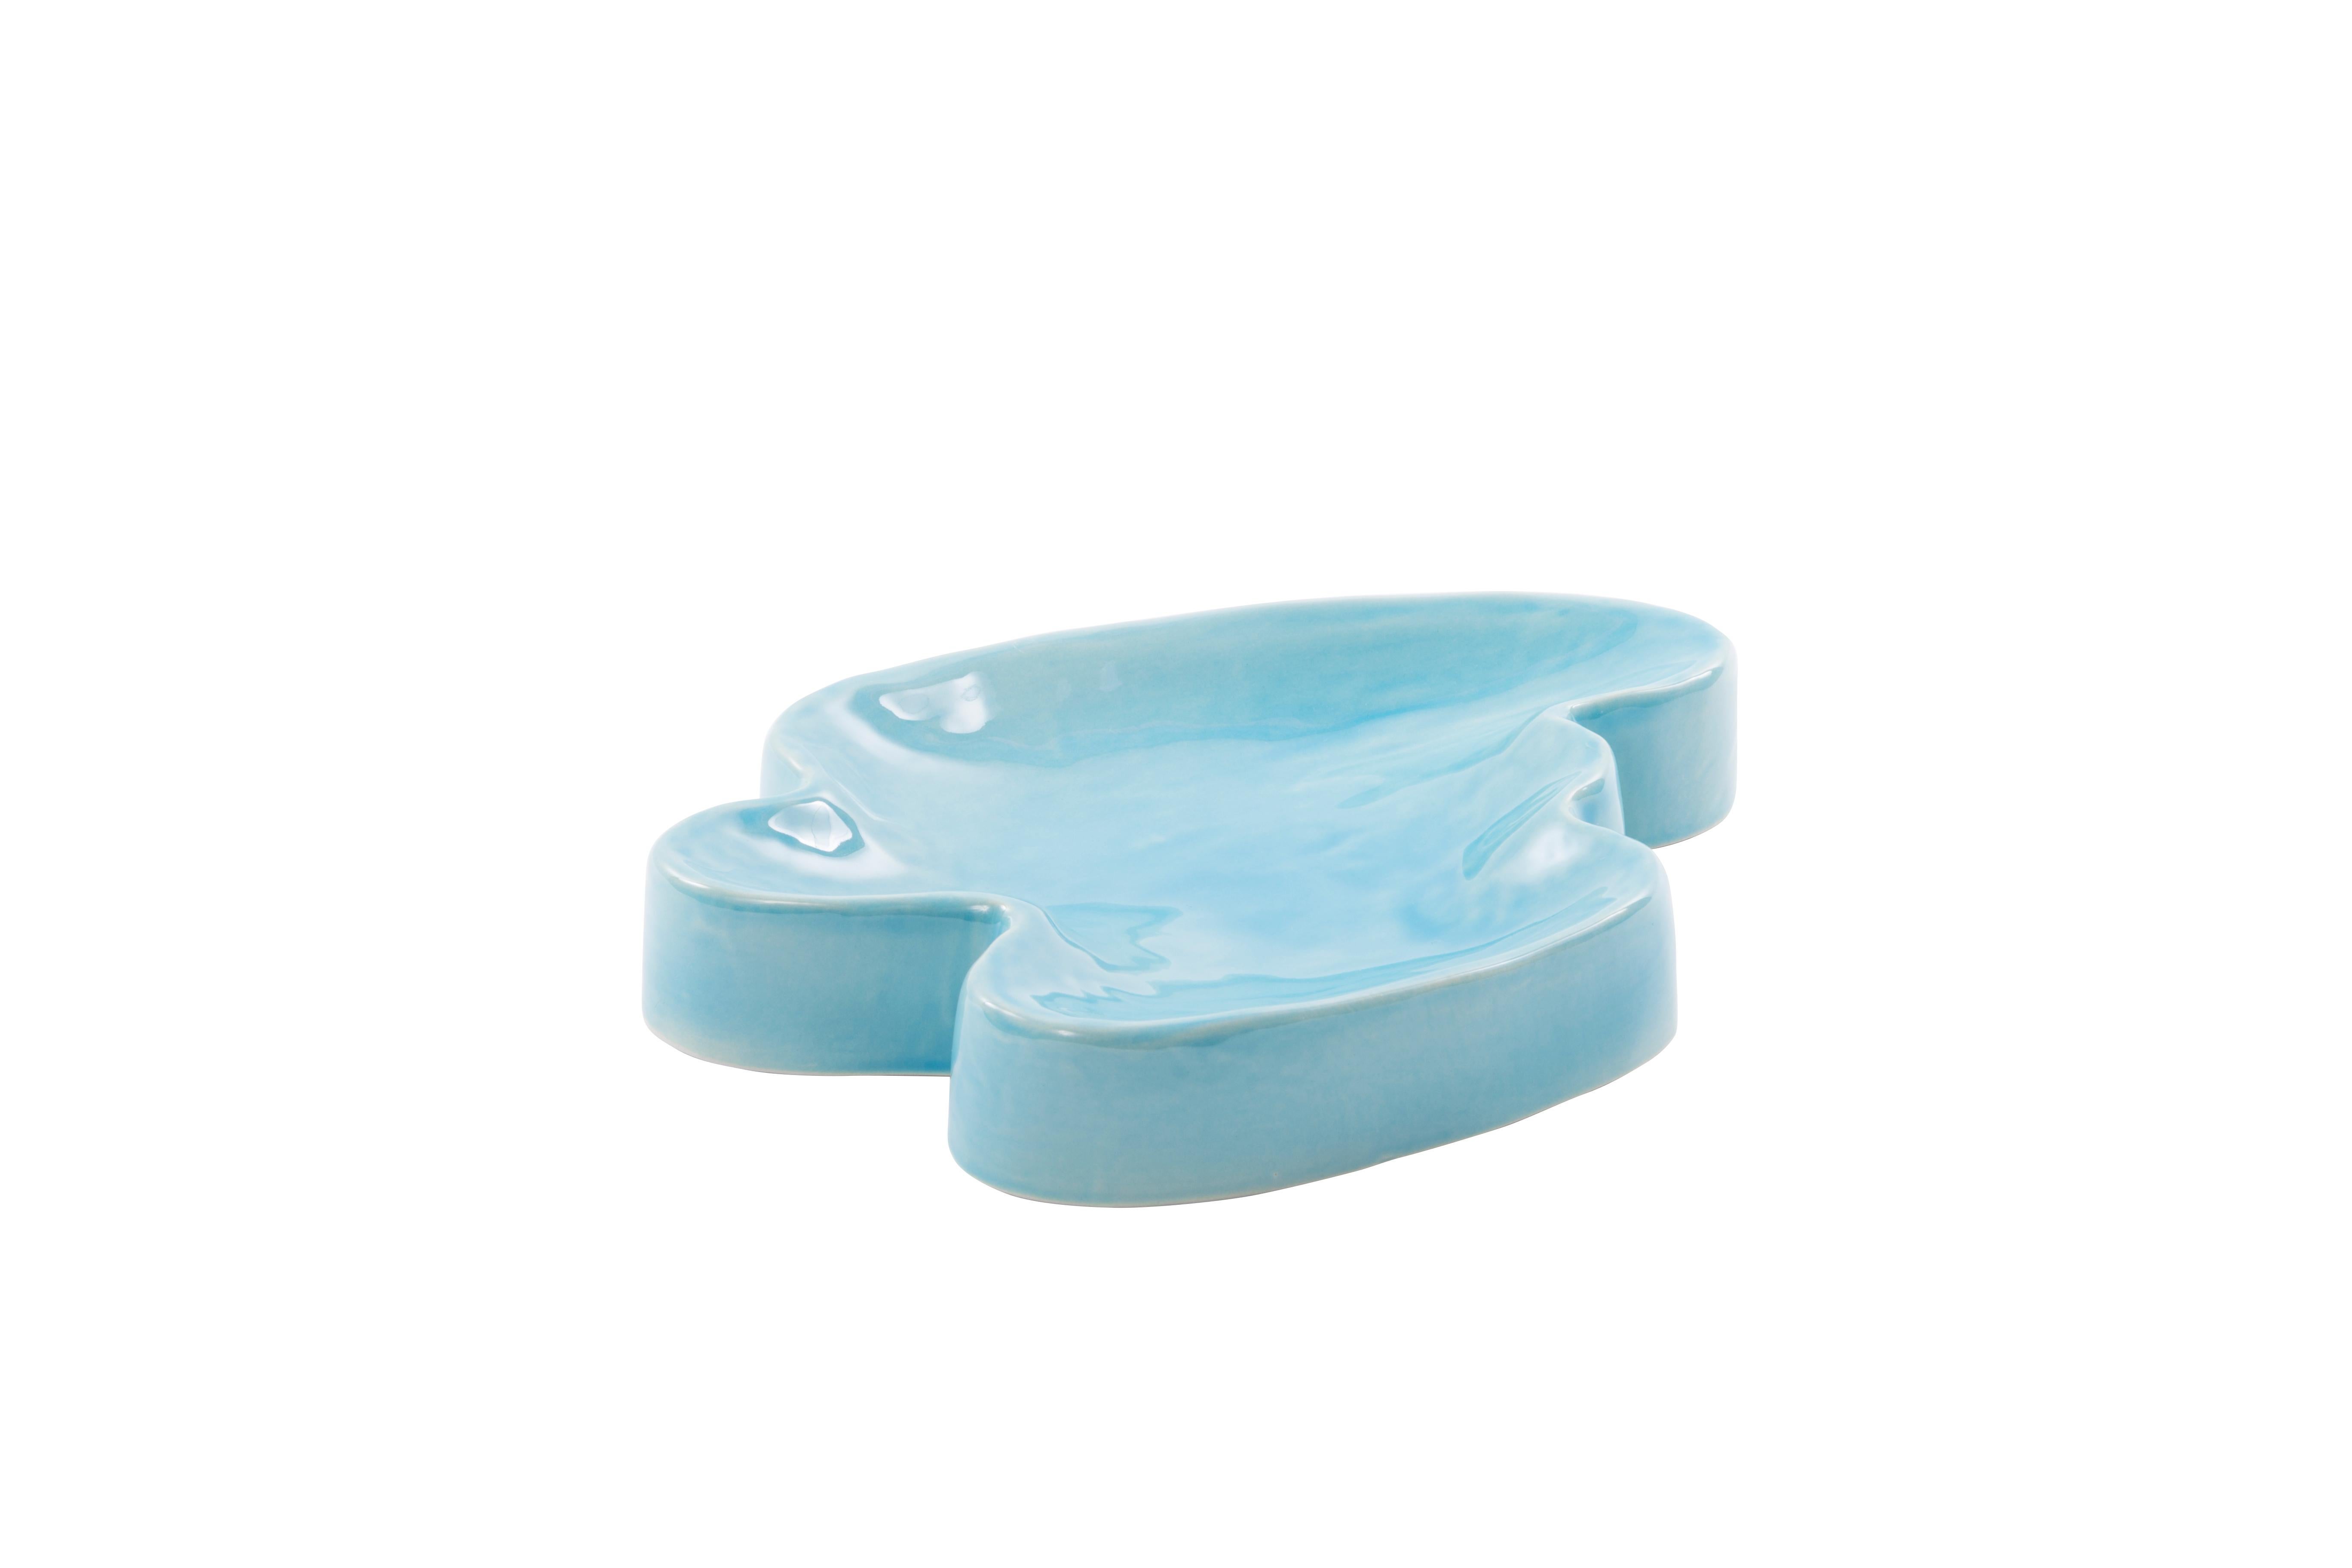 Set of 2 lake small tropical Turquoise tray by Pulpo
Dimensions: D 27 x W 20 x H 4 cm
Materials: ceramic

Also available in different colours.

These charming additions allow you to create a true tablescape environment; from the tones and